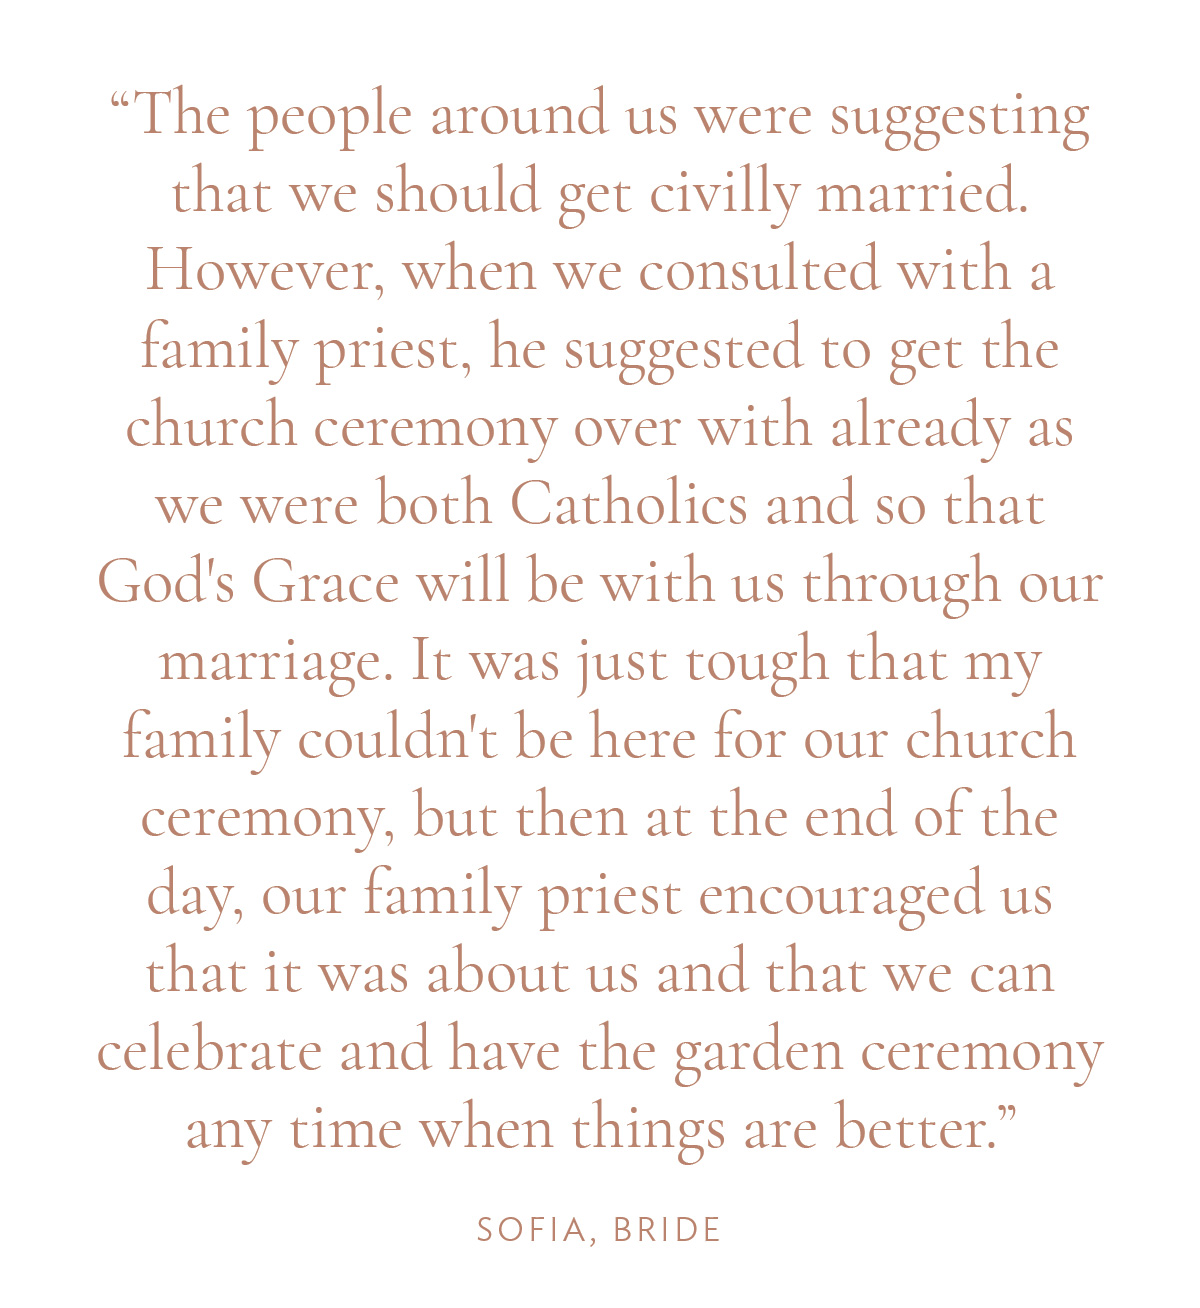 "The people around us were suggesting that we should get civilly married. However, when we consulted with a family priest, he suggested to get the church ceremony over with already as we were both Catholics and so that God's Grace will be with us through our marriage. It was just tough that my family couldn't be here for our church ceremony, but then at the end of the day, our family priest encouraged us that it was about us and that we can celebrate and have the garden ceremony any time when things are better." -Sofia, Bride